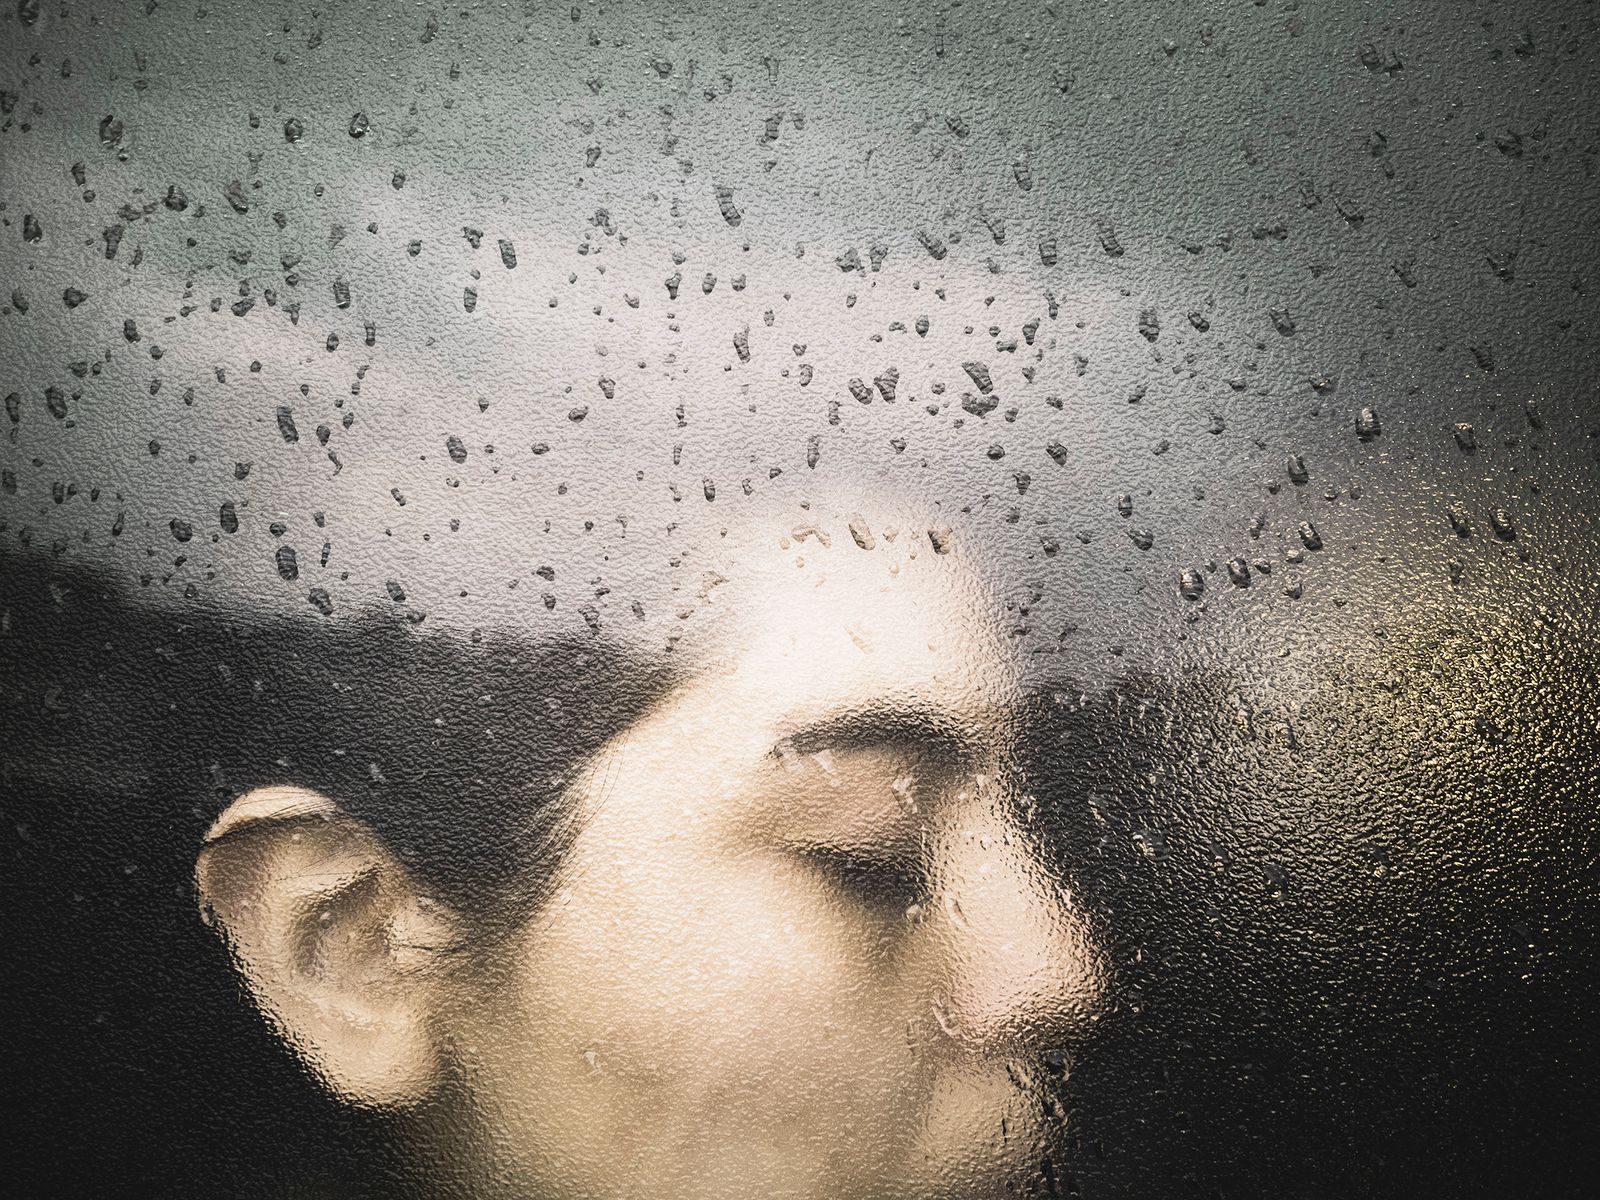 © Paola Ismene - Image from the Without rain nothing grows photography project